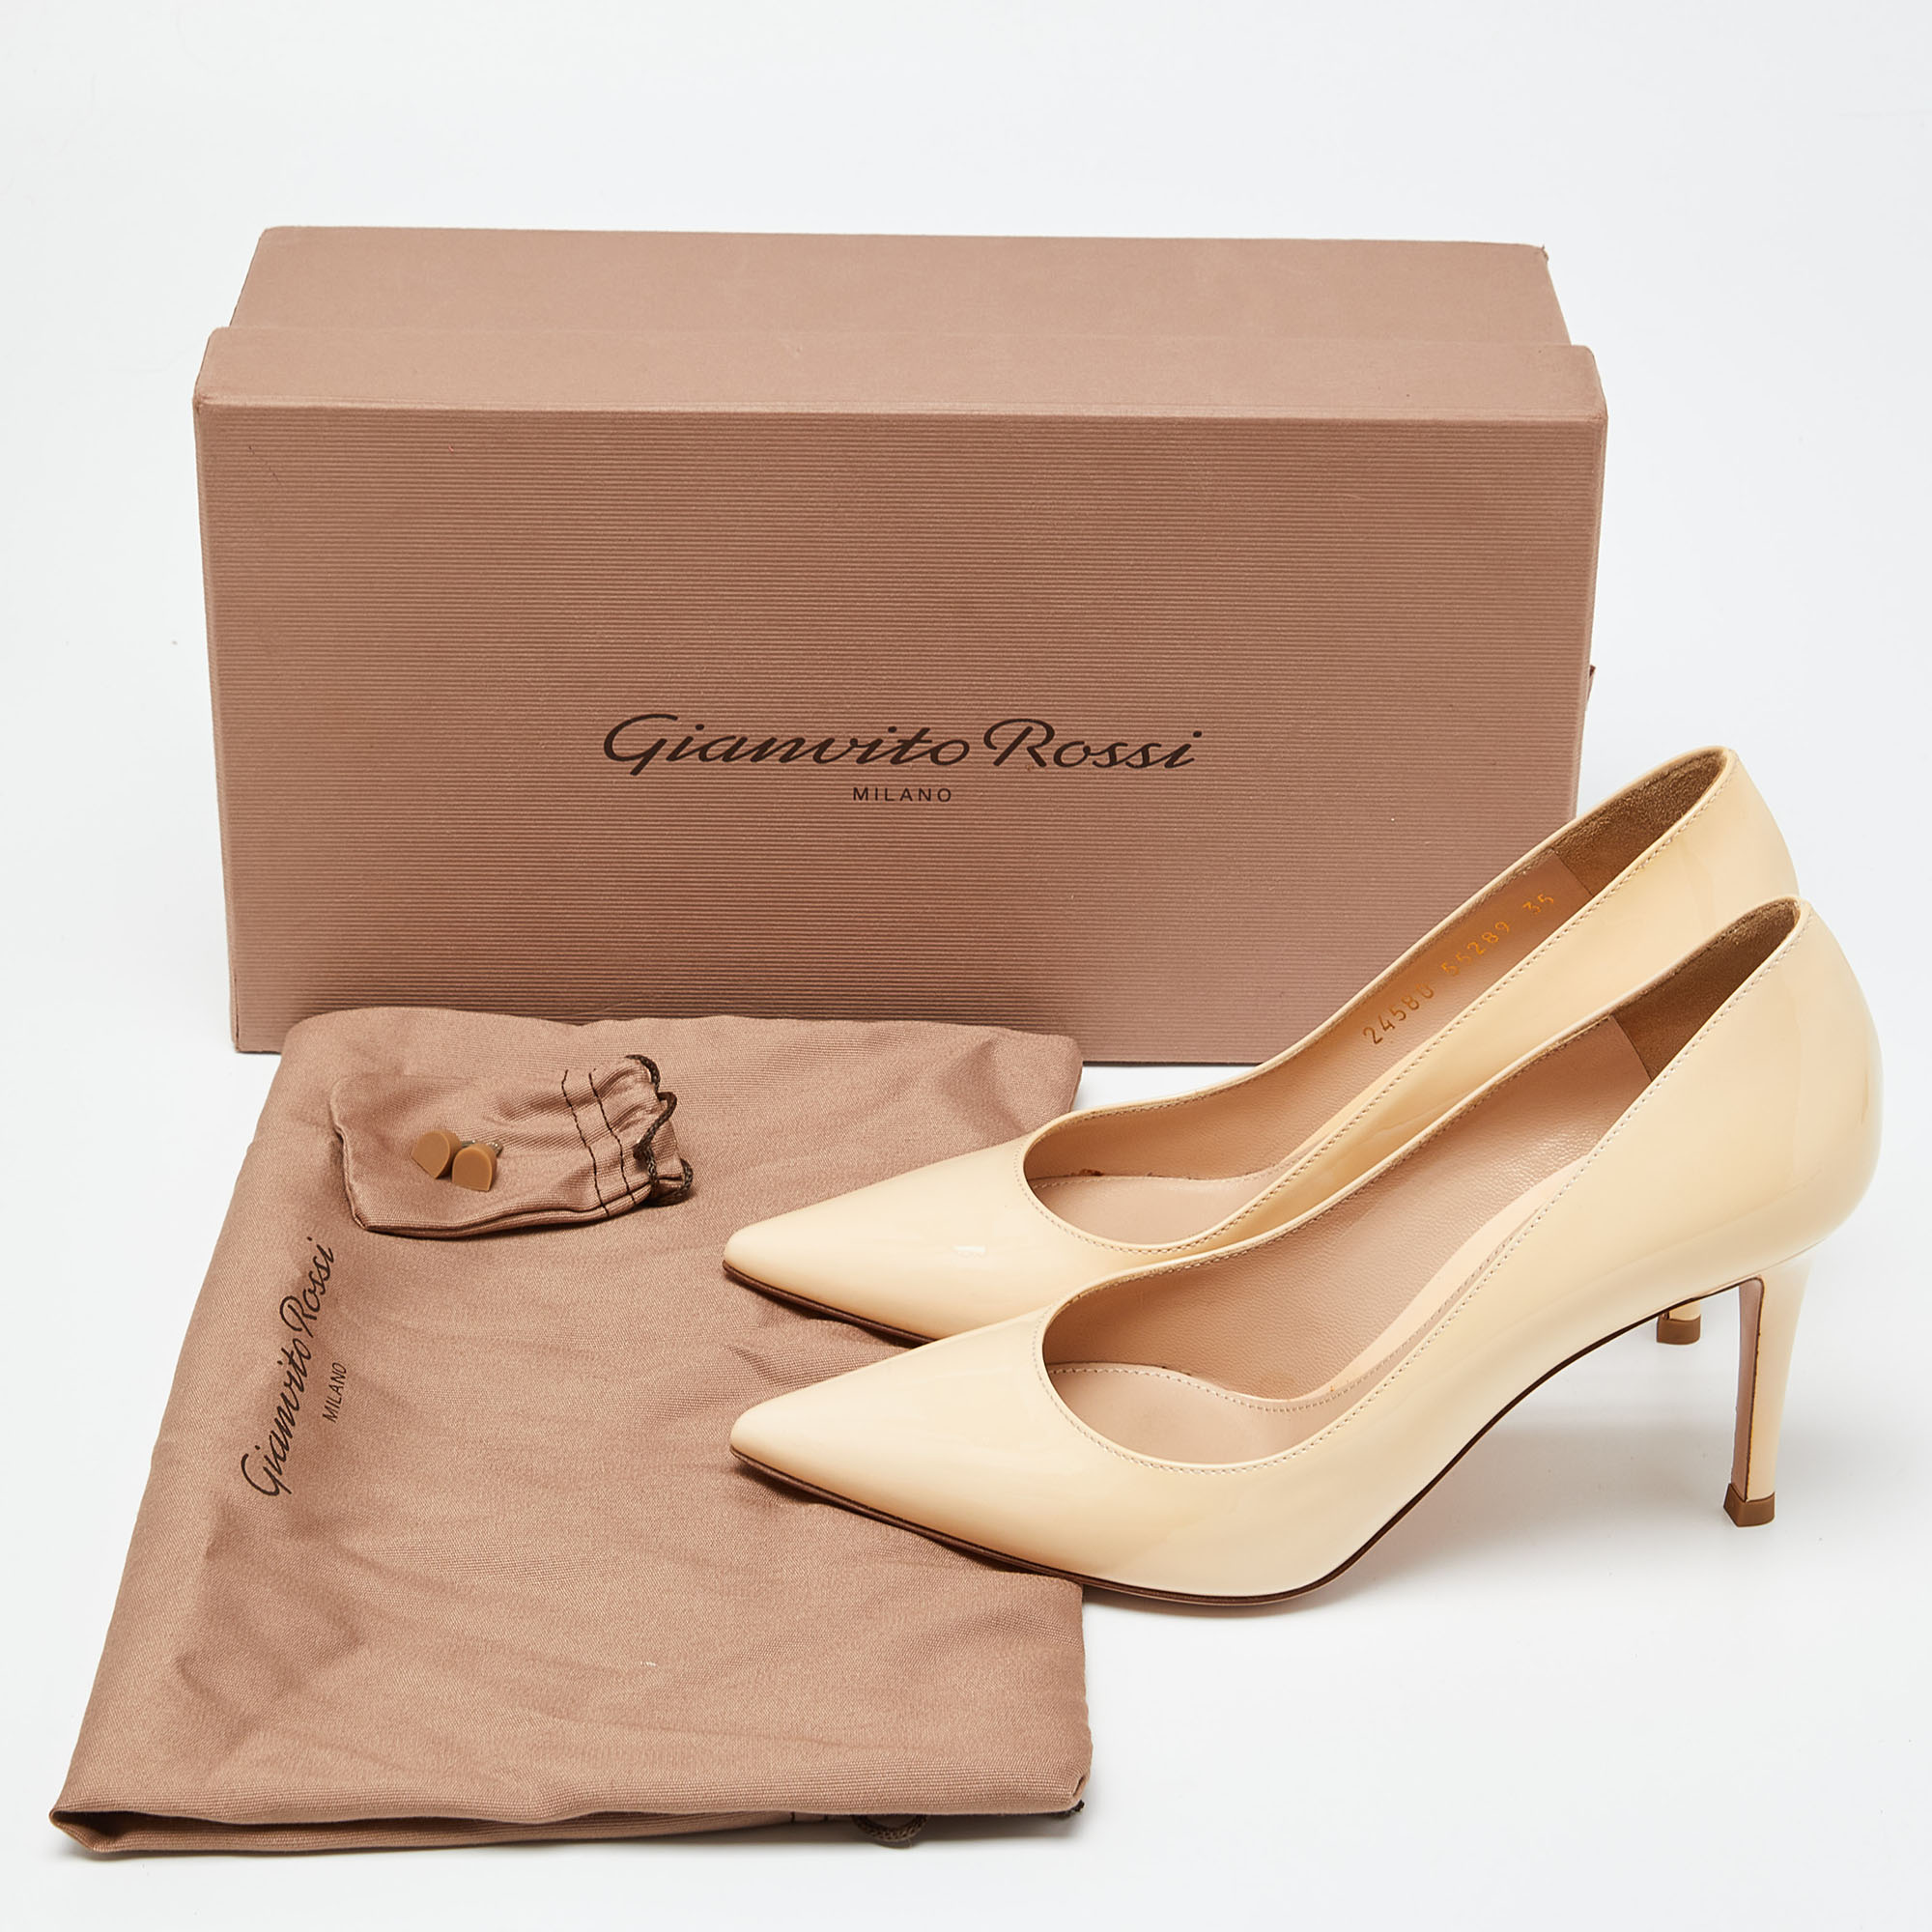 Gianvito Rossi Beige Patent Leather Gianvito 85 Pointed Toe Pumps Size 35